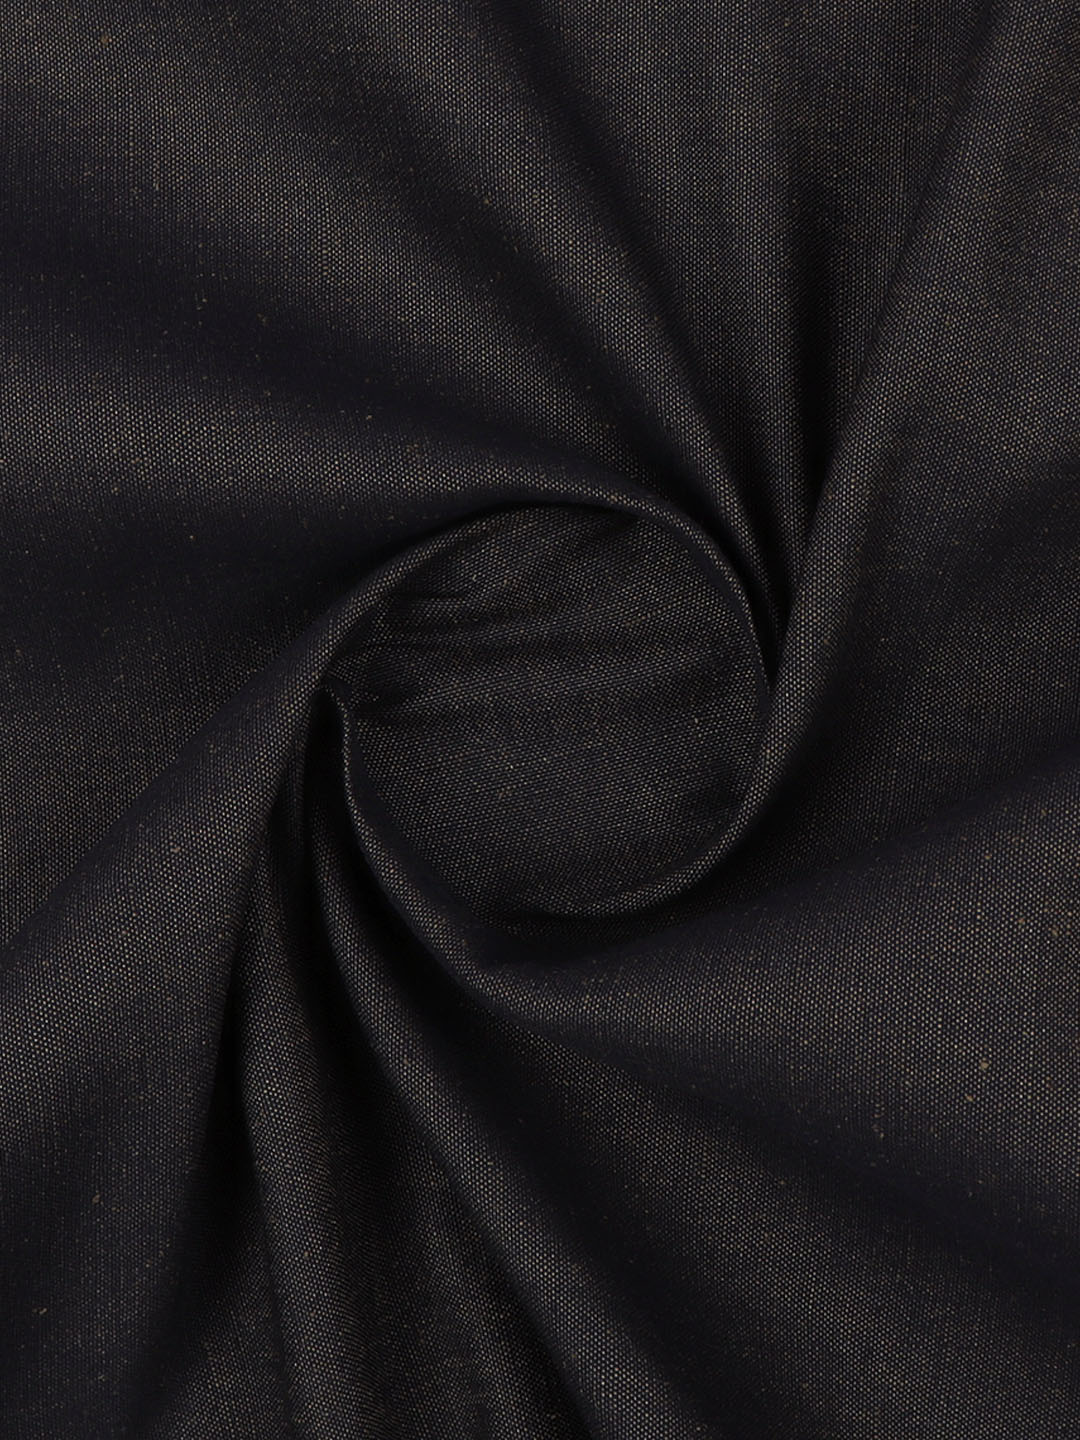 Linen Cotton Garland Suiting Fabric Black